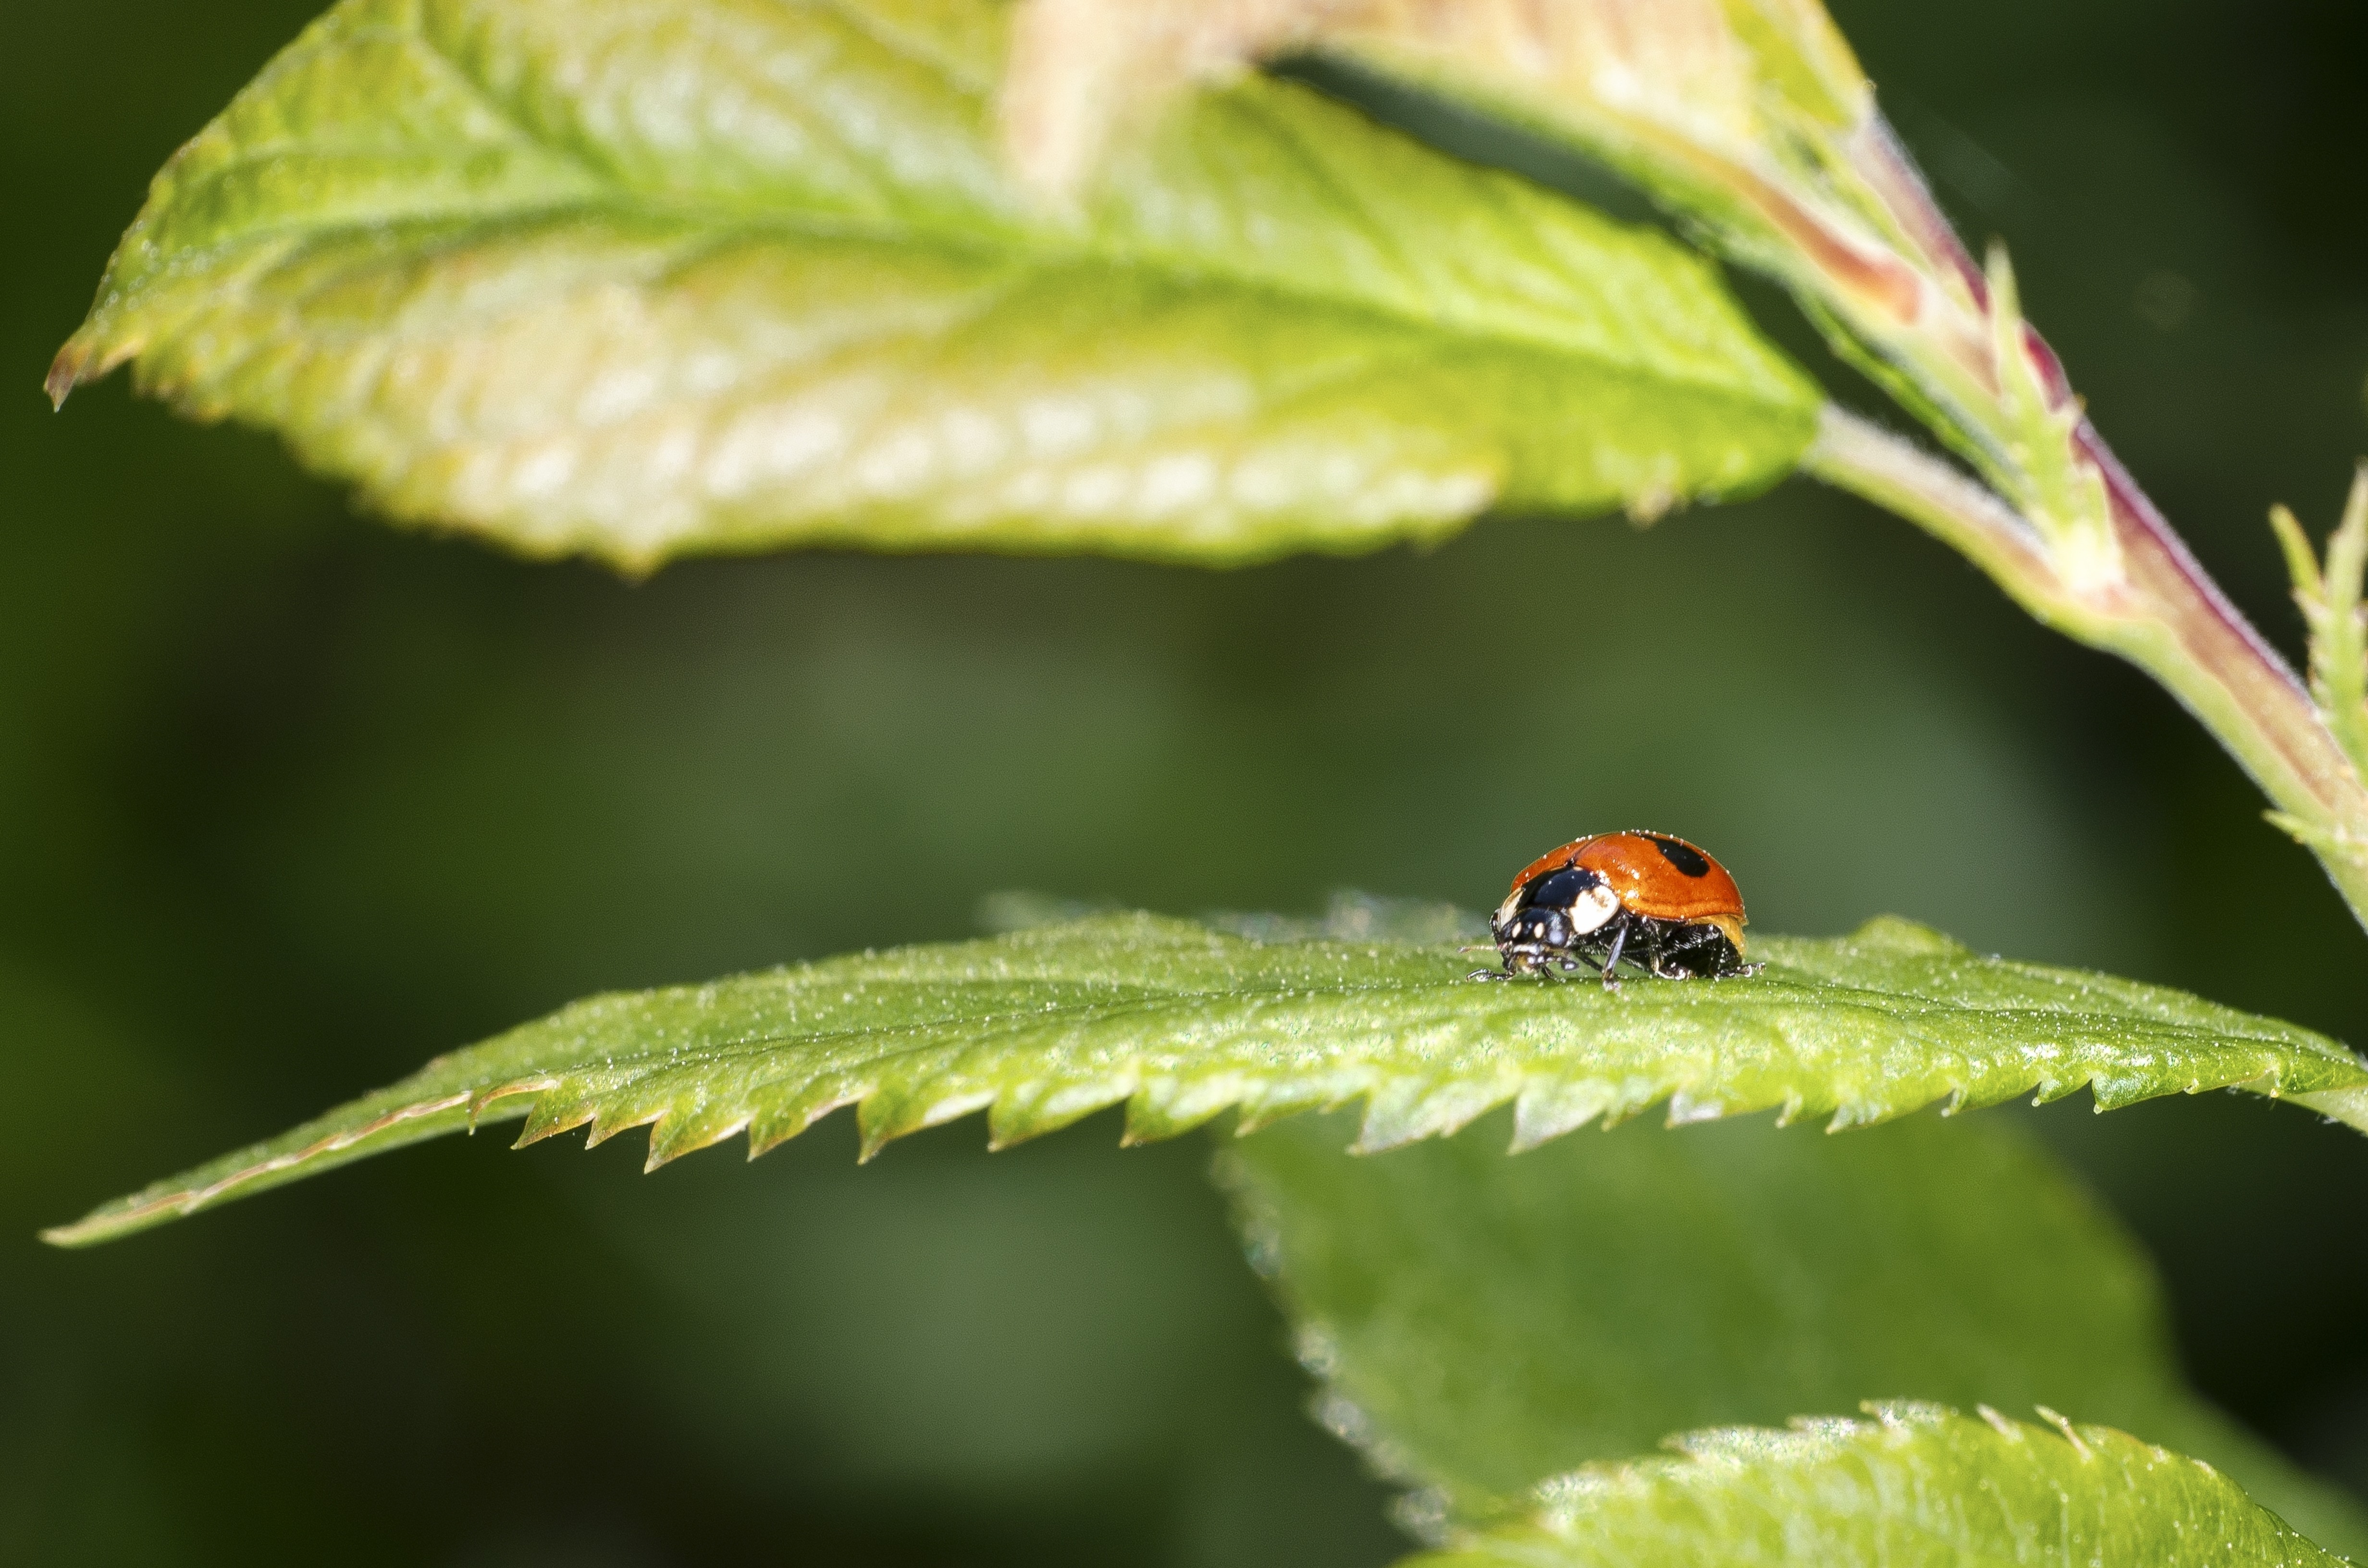 Ladybird, Winged Insect, Close-Up, insect, one animal